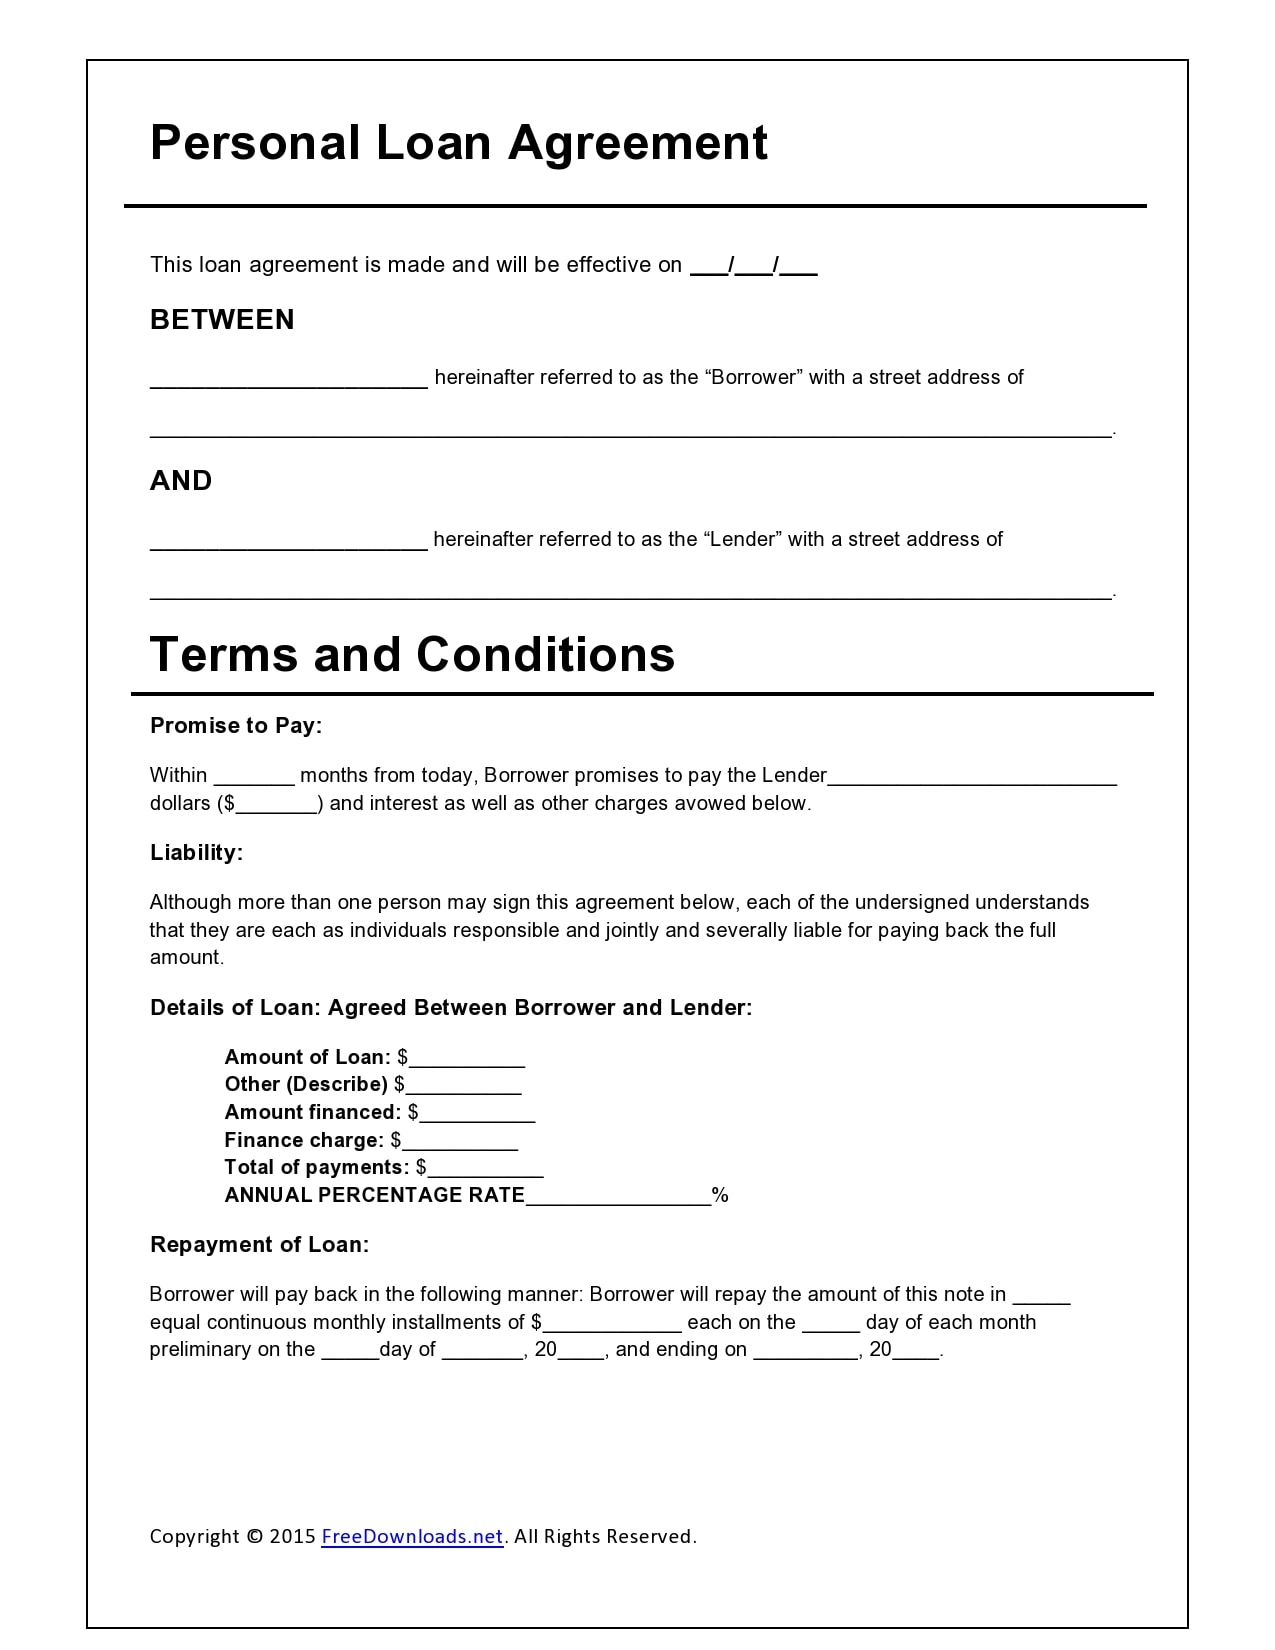 10 Simple Family Loan Agreement Templates (10% Free)